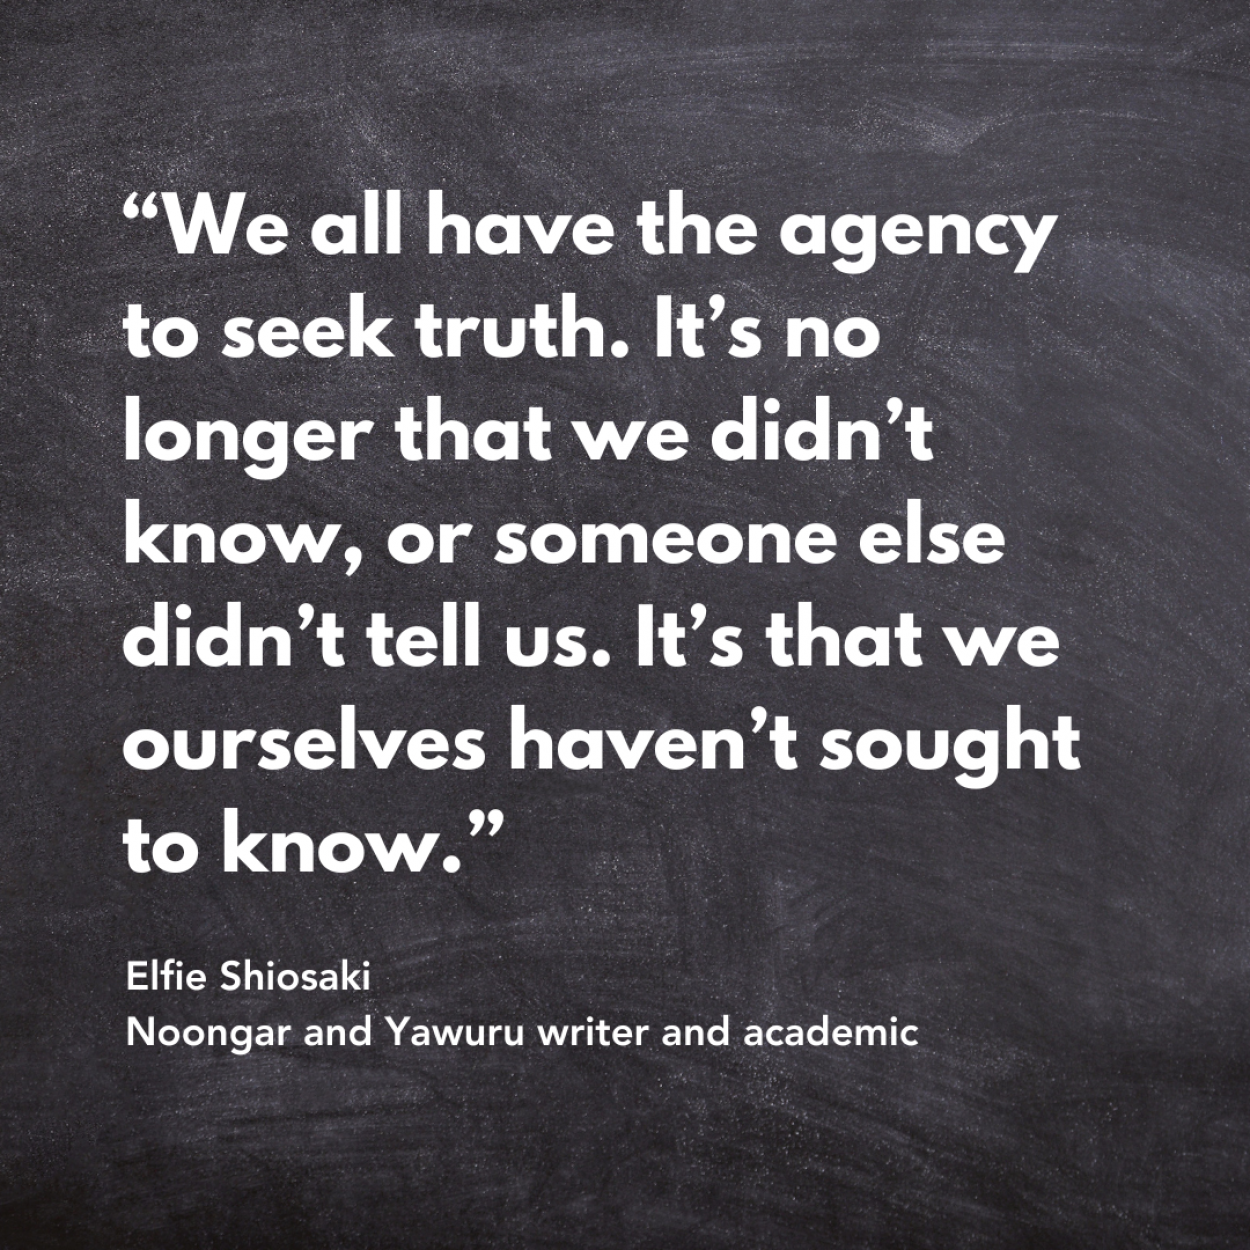 Quote tile: “We all have the agency to seek truth. It’s no longer that we didn’t know, or someone else didn’t tell us. It’s that we ourselves haven’t sought to know.” - Elfie Shiosaki Noongar and Yawuru writer and academic